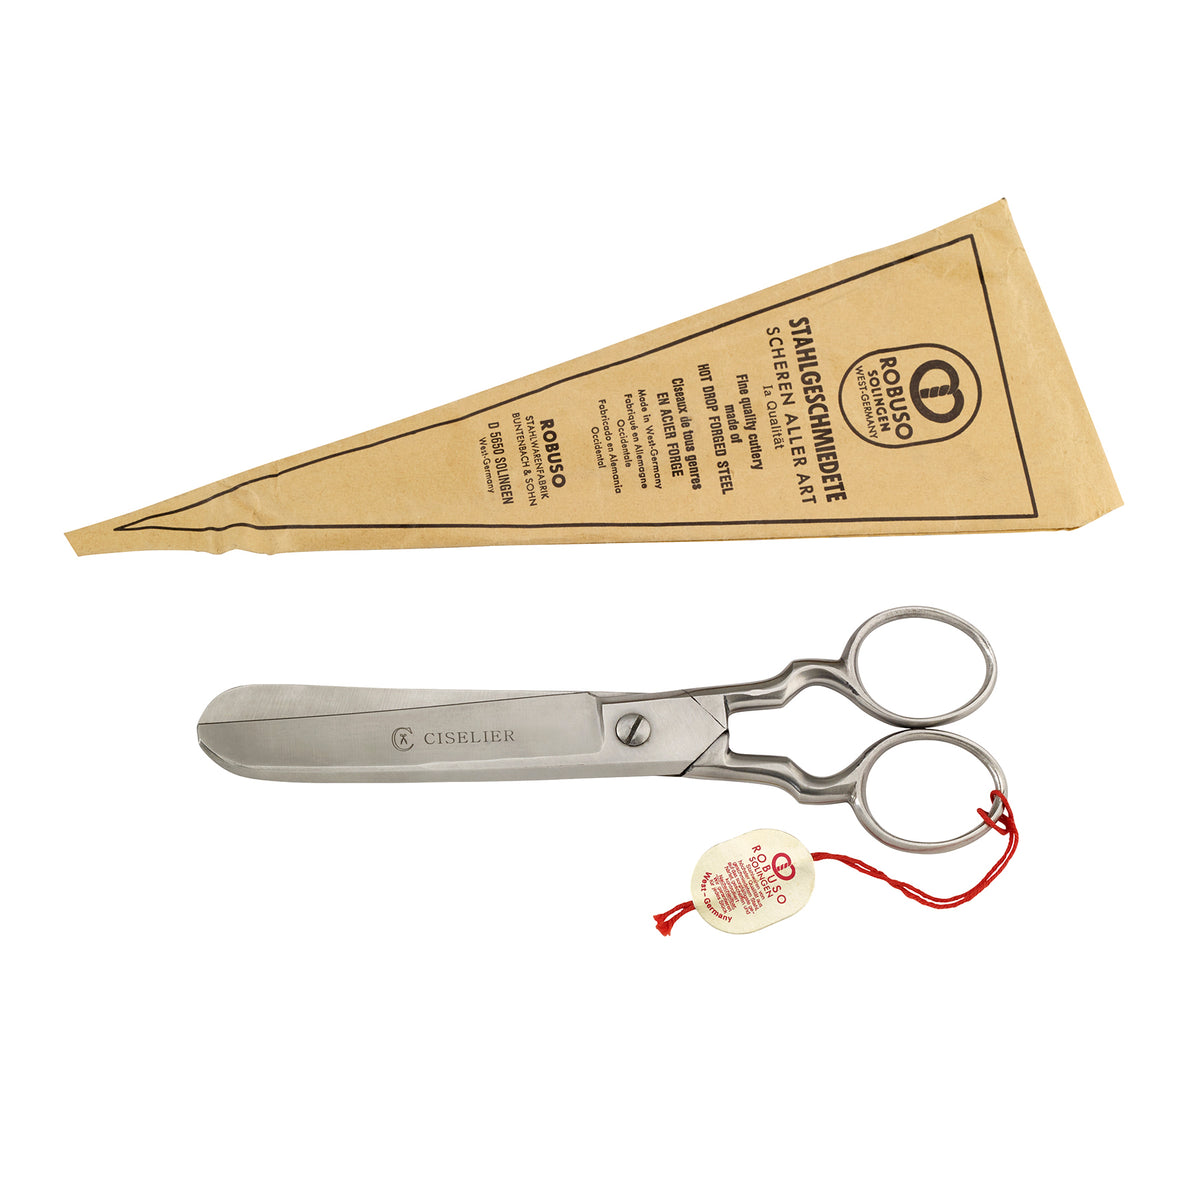 Robuso Wessi Vintage Trimmers - Ciselier Exclusive